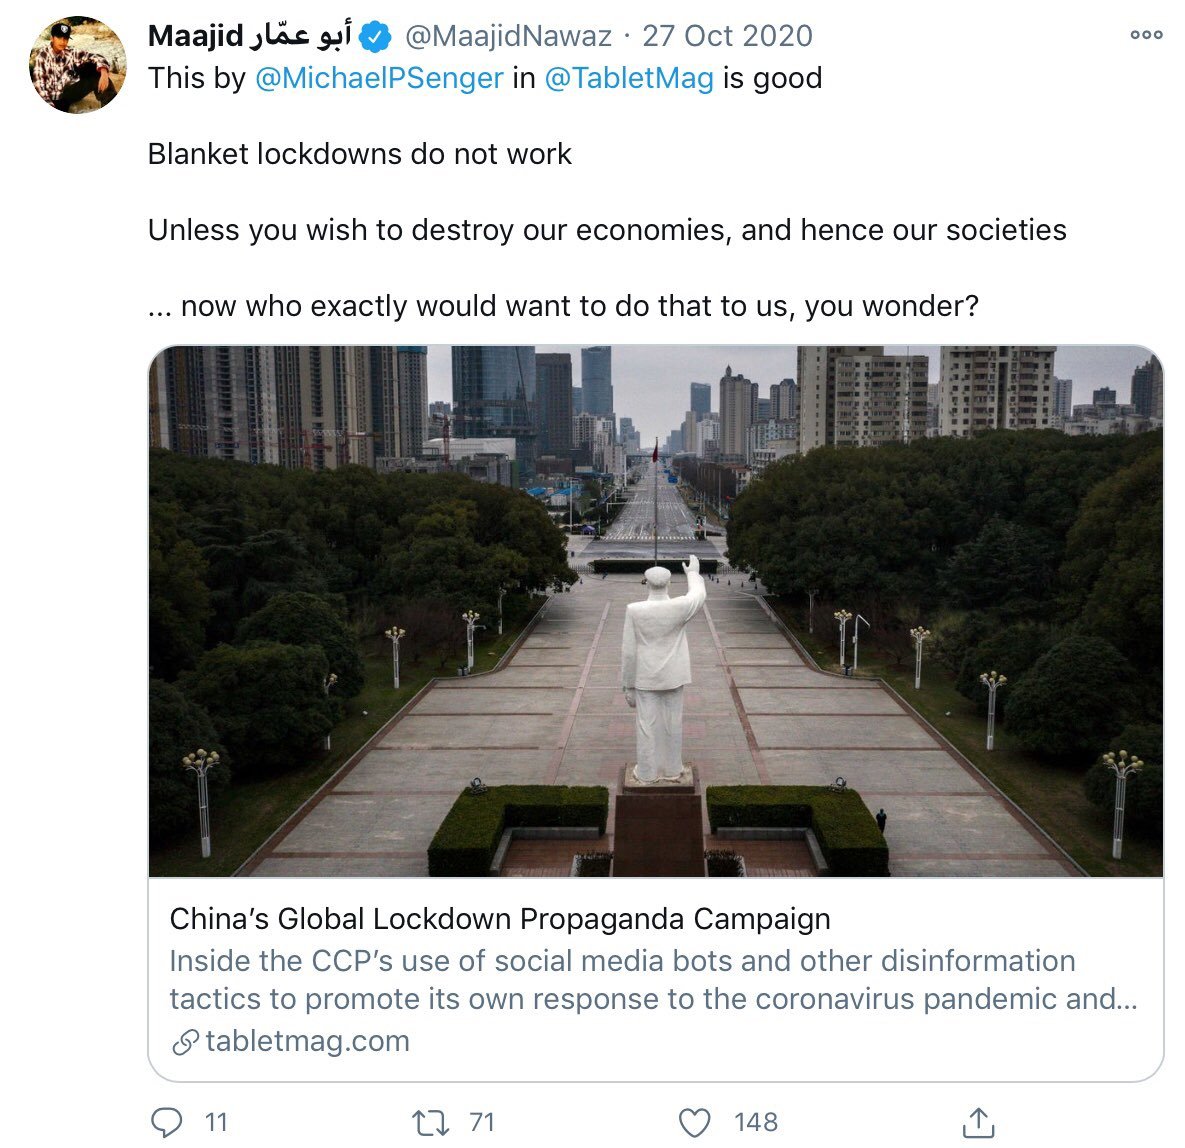 Michael P Senger appears to be a tax attorney in the Greater Atlanta area, having studied accountancy and tax law: "Covid lockdowns aren't science; they're CCP propaganda" is his Twitter handle. Mr Nawaz was a fan of his writing about how we all fell for China's plot.